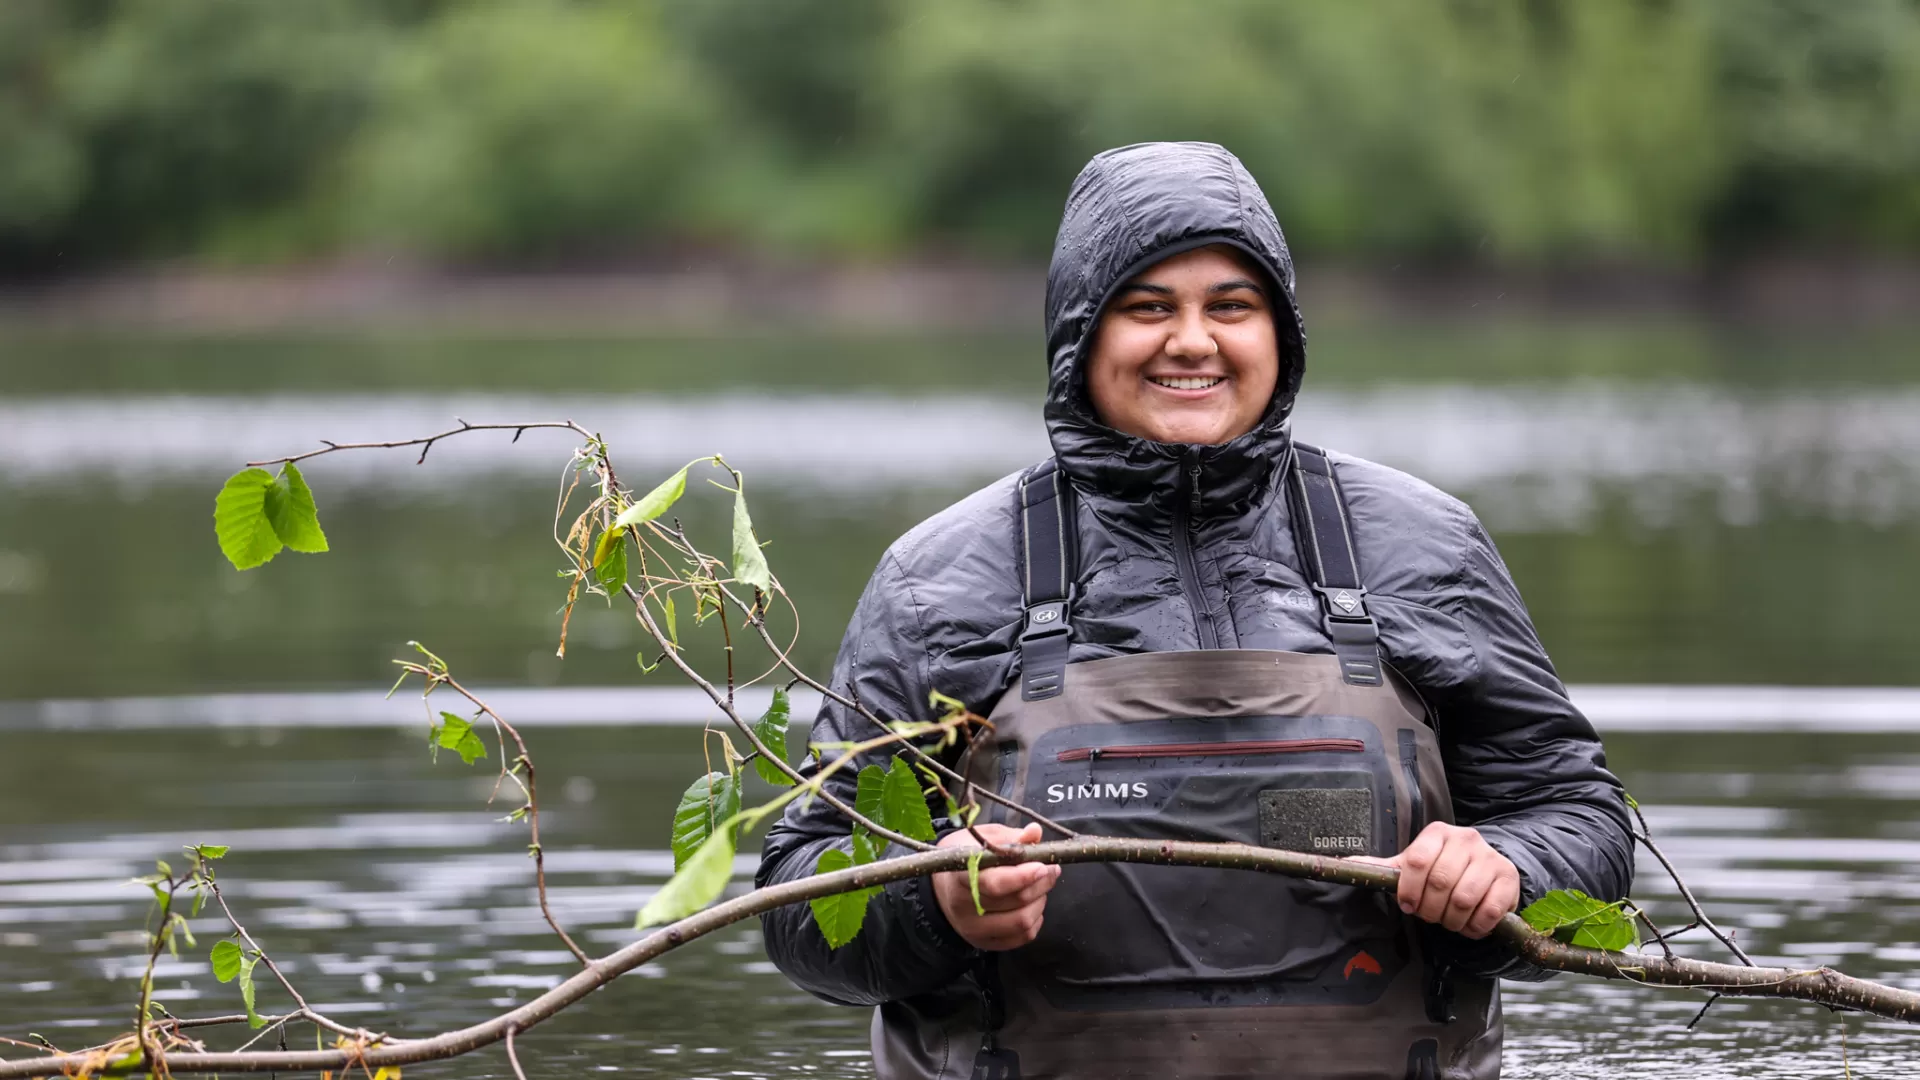 A smiling woman, wearing overalls and a hood, holding a tree branch and standing waist-deep in a river.